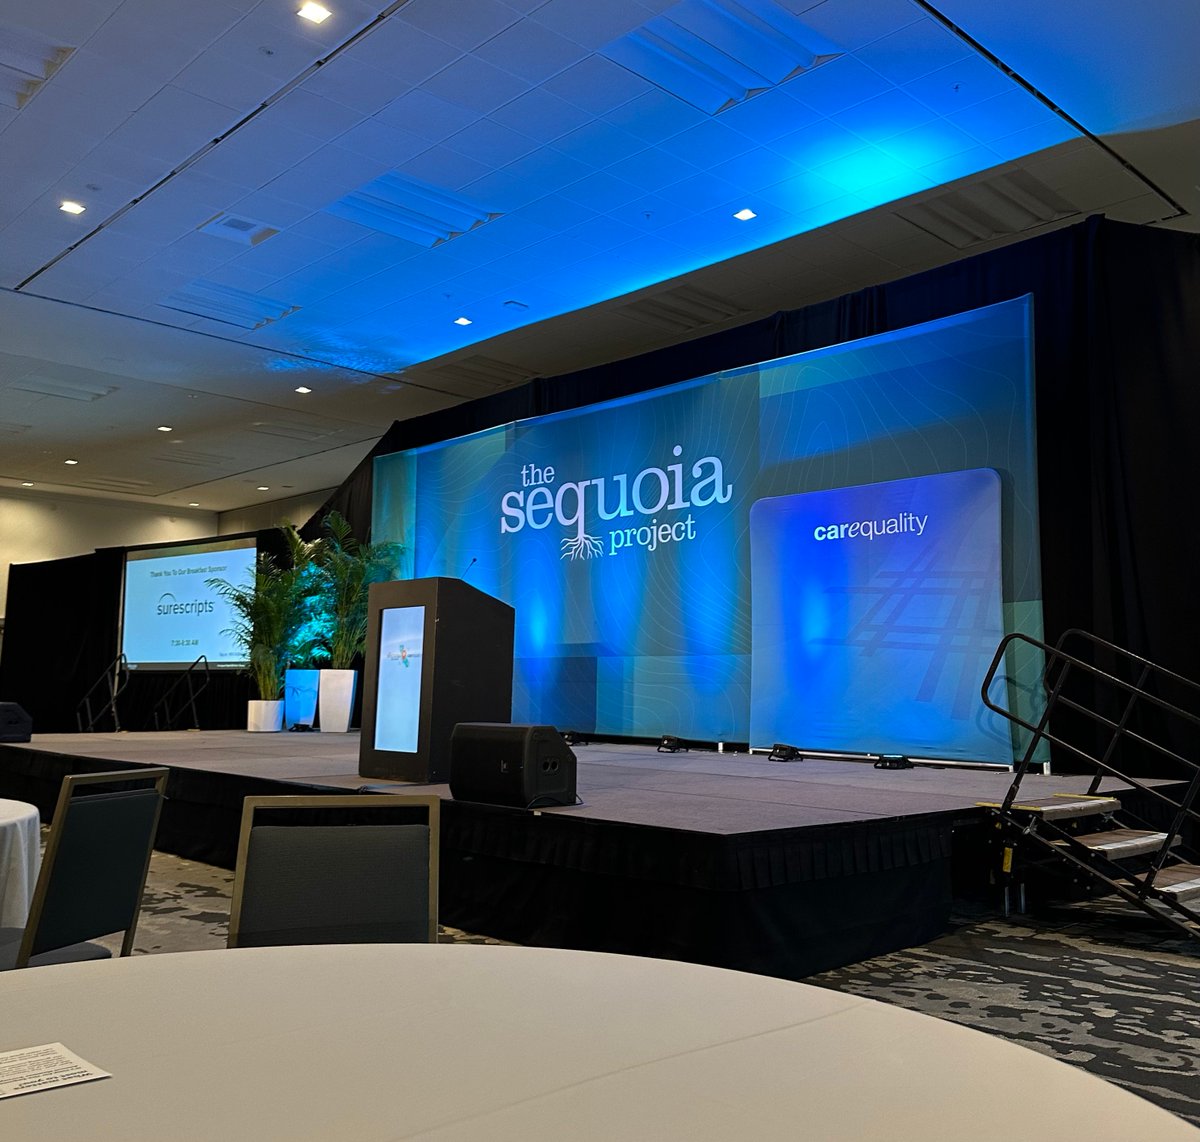 We're at the @sequoiaproject Annual Meeting this week, trying to figure out if QHINs are real 🛸

#TEFCA #TheSequoiaProject #Carequality #QHIN #Interoperability #patientaccess #Metriport